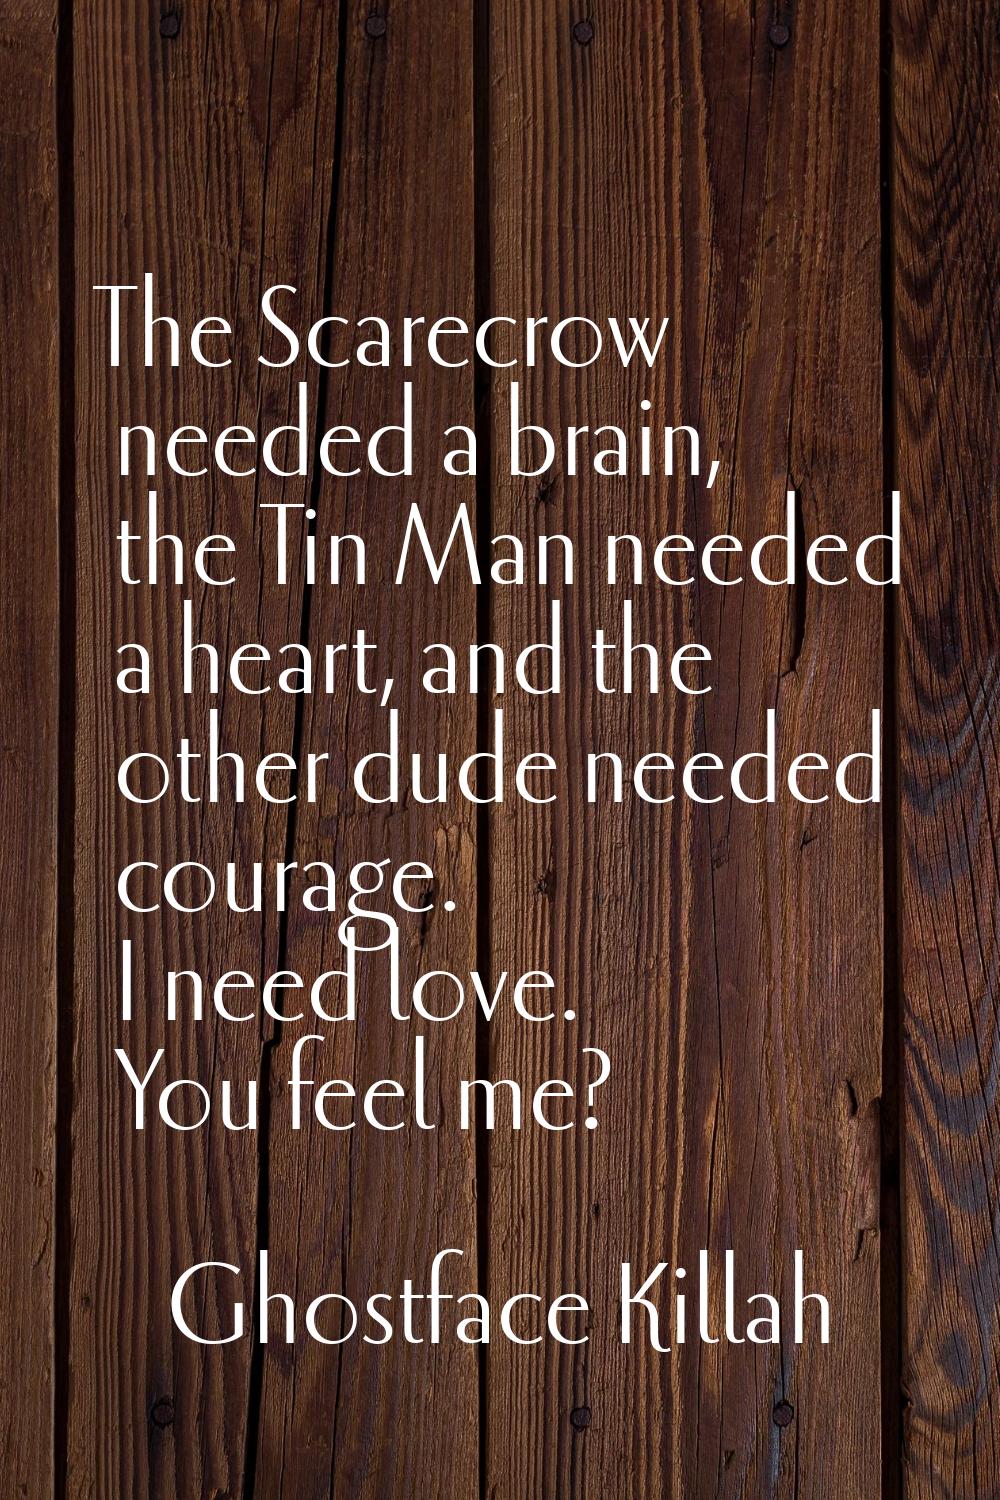 The Scarecrow needed a brain, the Tin Man needed a heart, and the other dude needed courage. I need